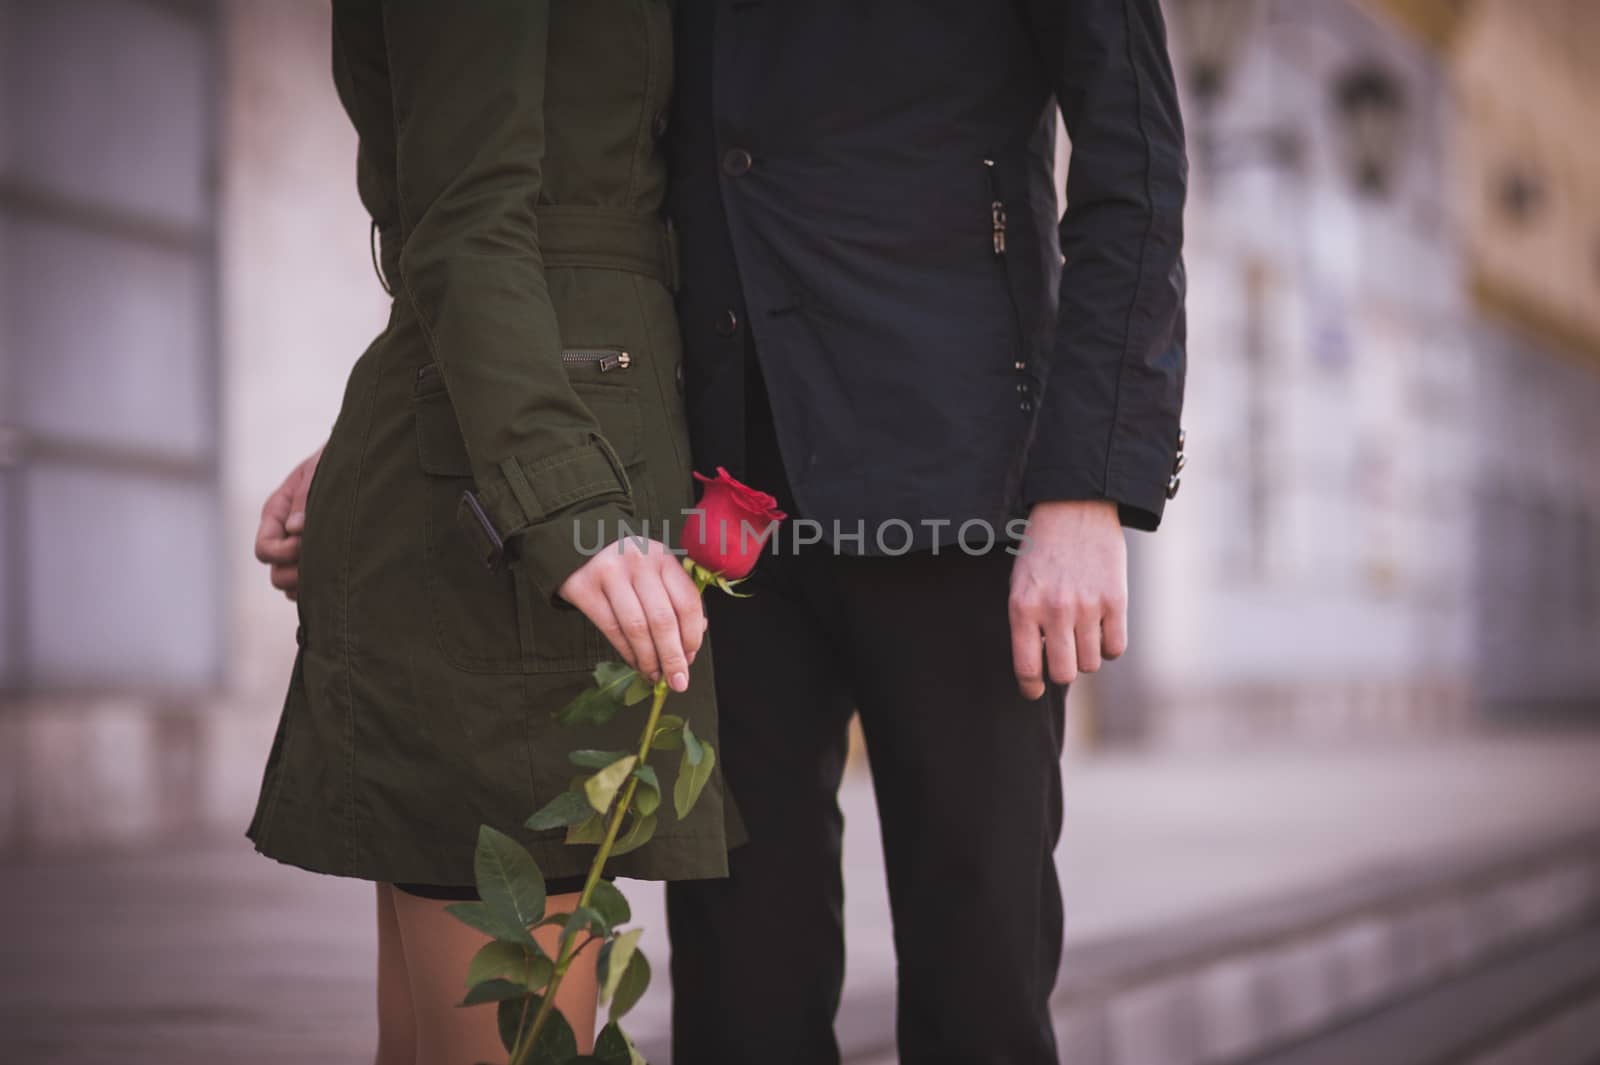 couple in love  holding hands togetherwith red rose  no face 